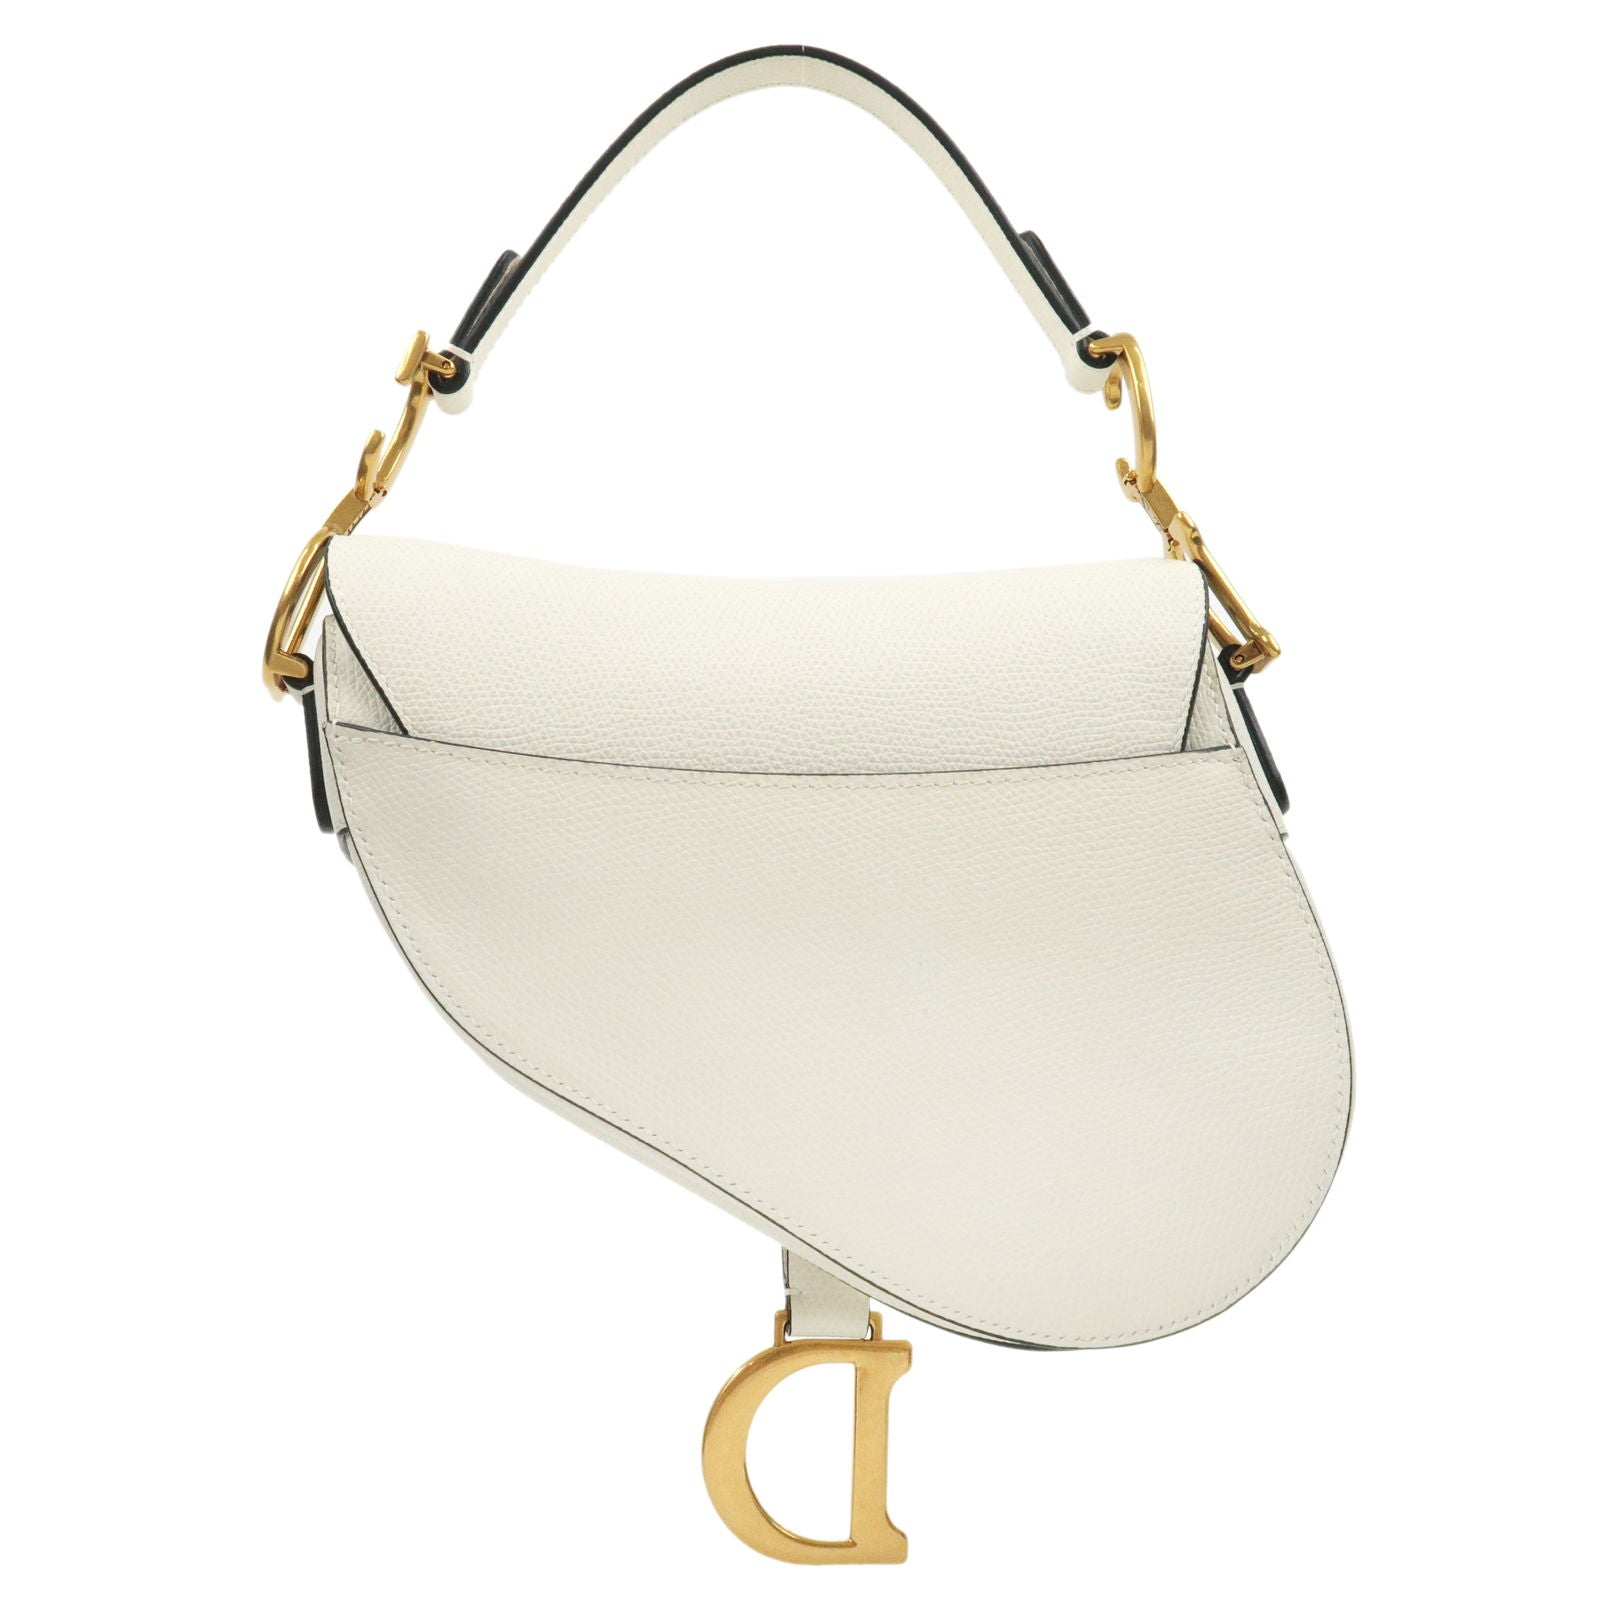 Dior Saddle bag with strap white leather